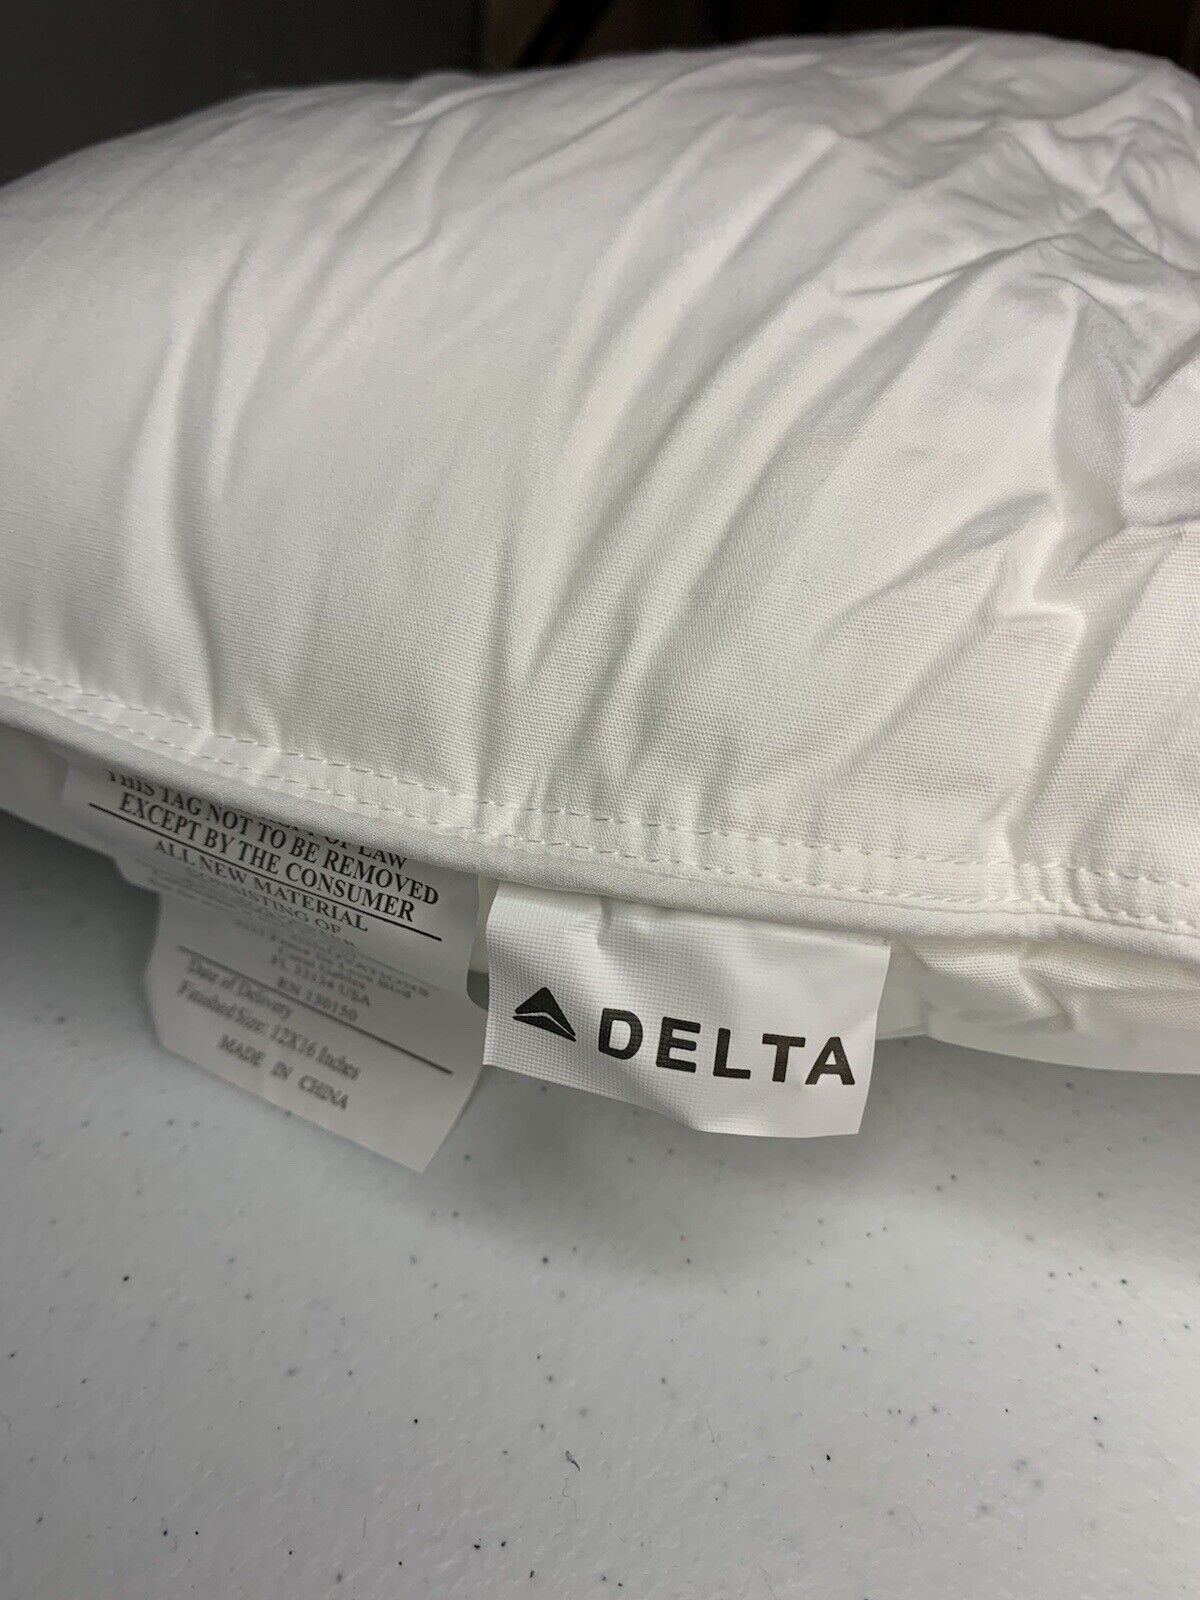 Rare Delta Airlines Heavenly Collection First Class Pillow 12x16 in. Brand New.